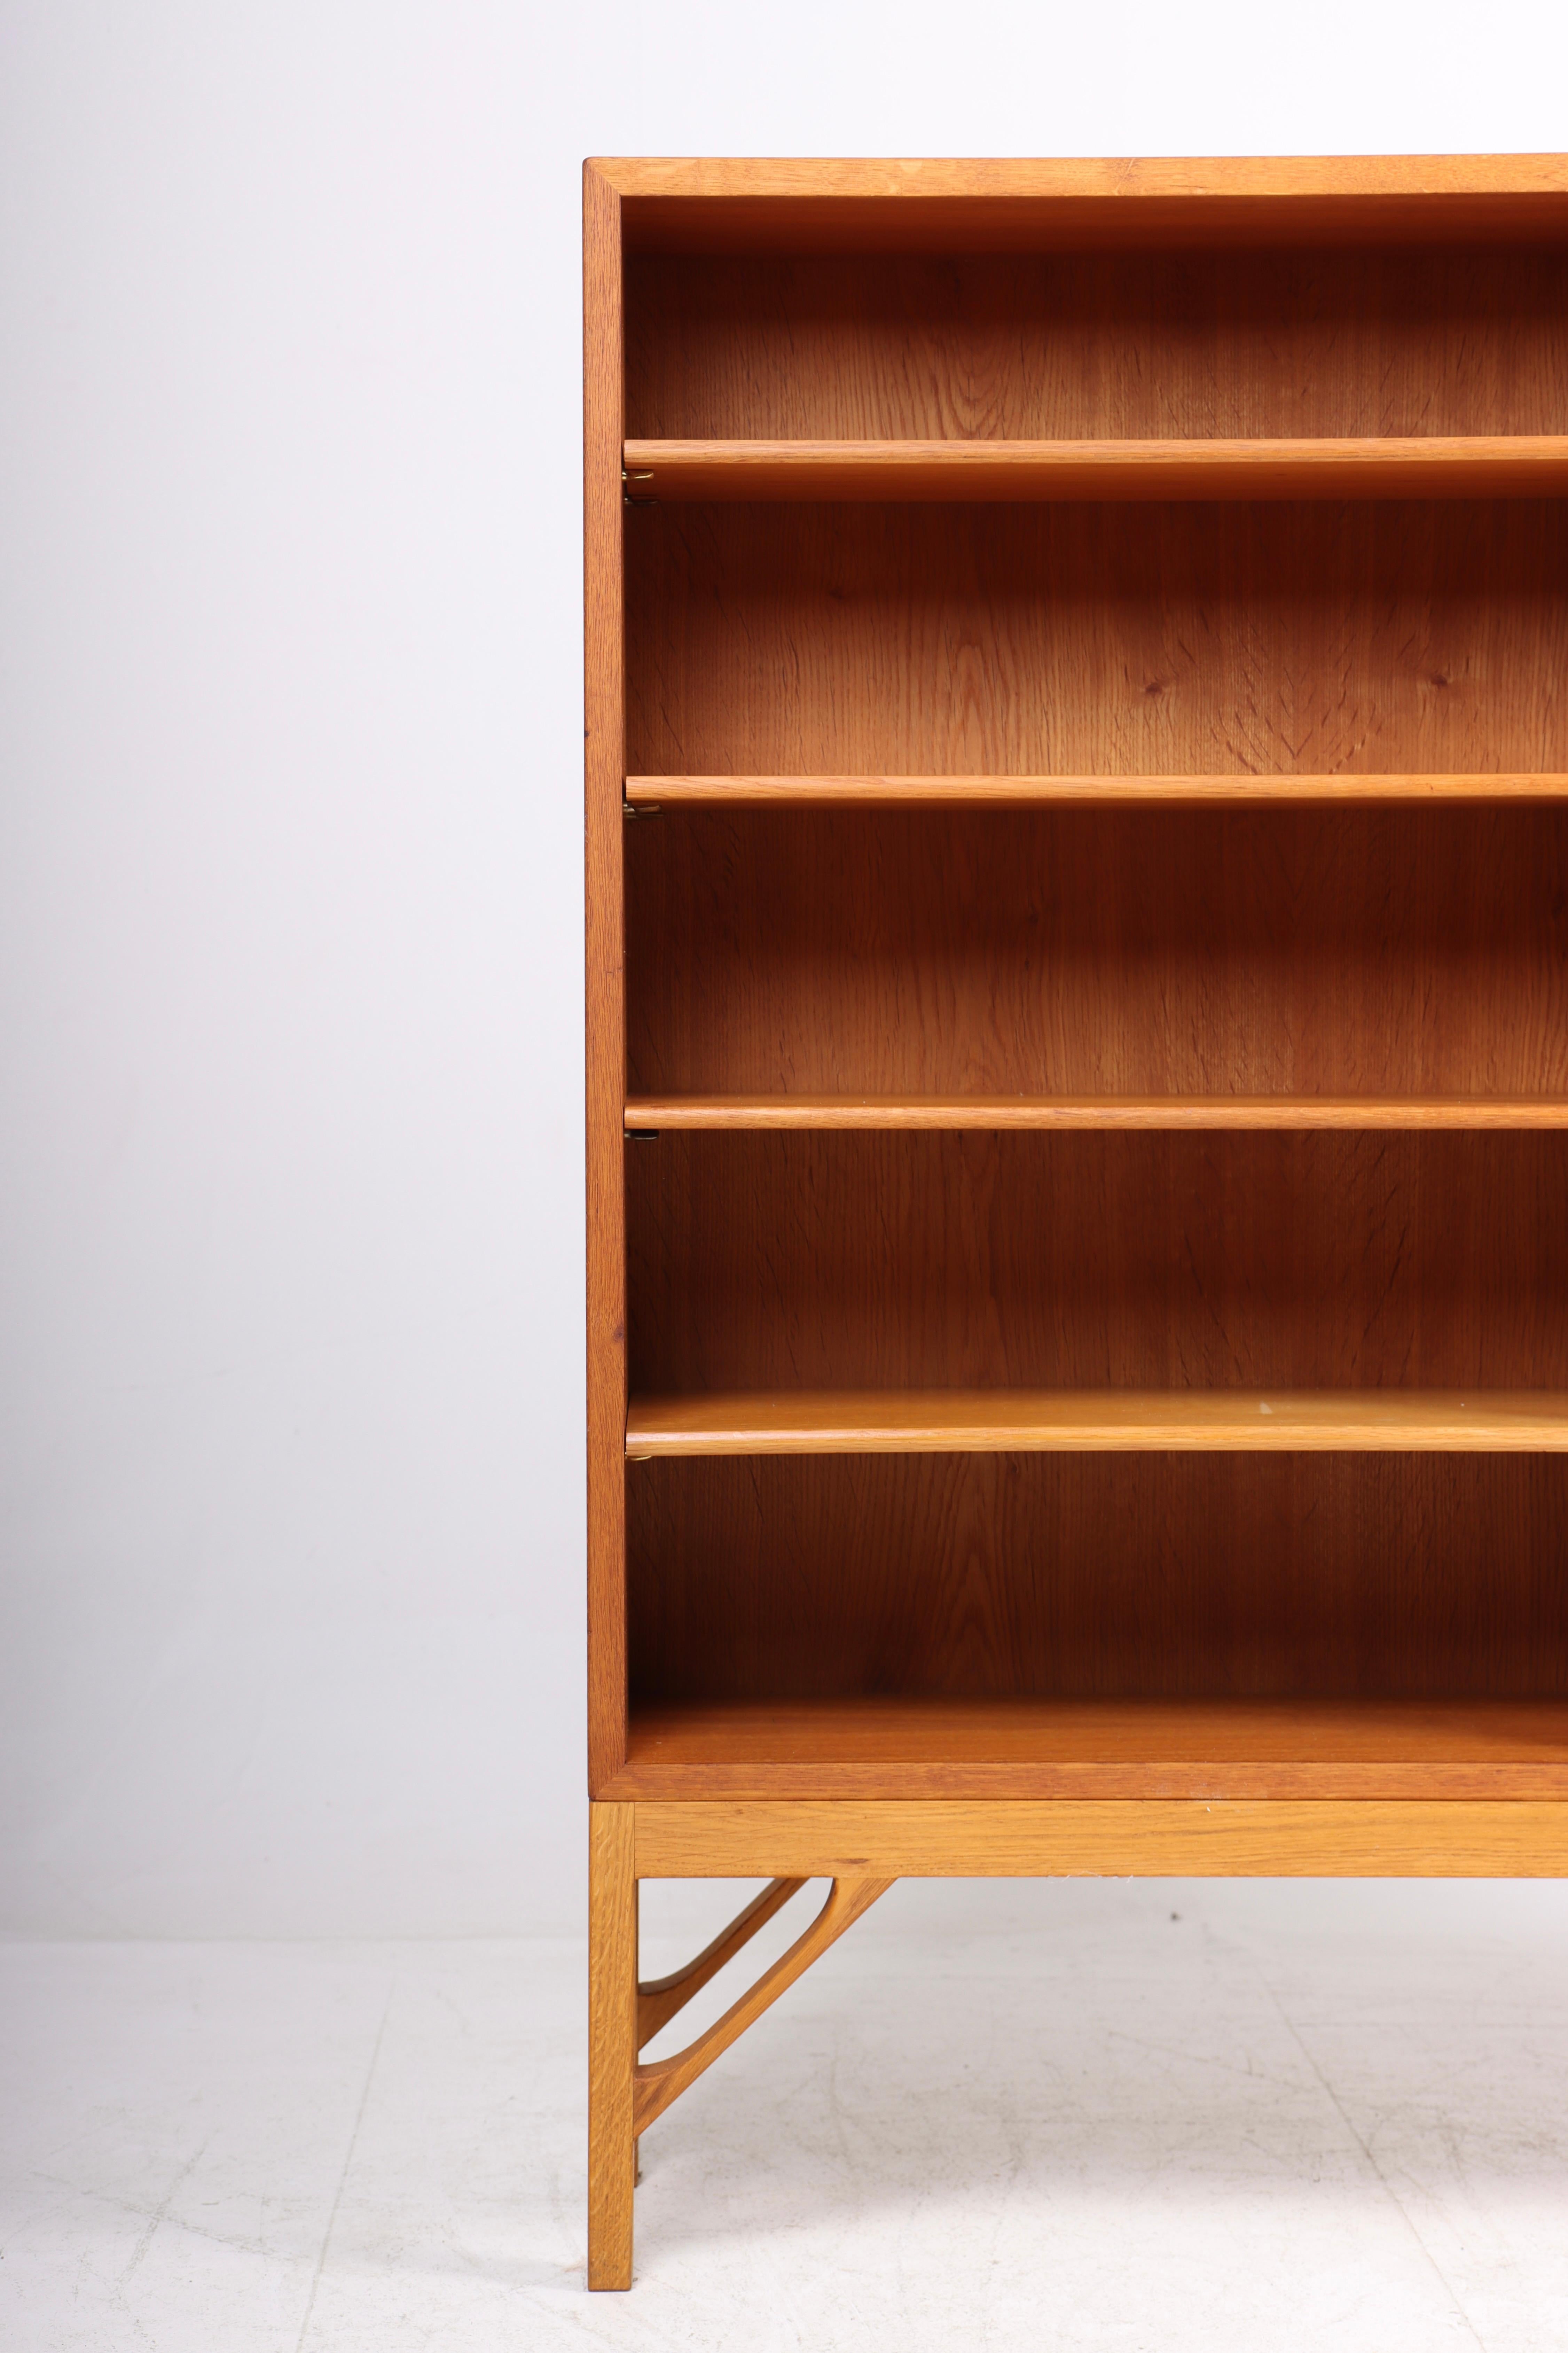 China bookcase in oak. Designed by MAA. Børge Mogensen in 1958, this piece is made by CM Madsen cabinetmakers Denmark in the 1960s. Great original condition.